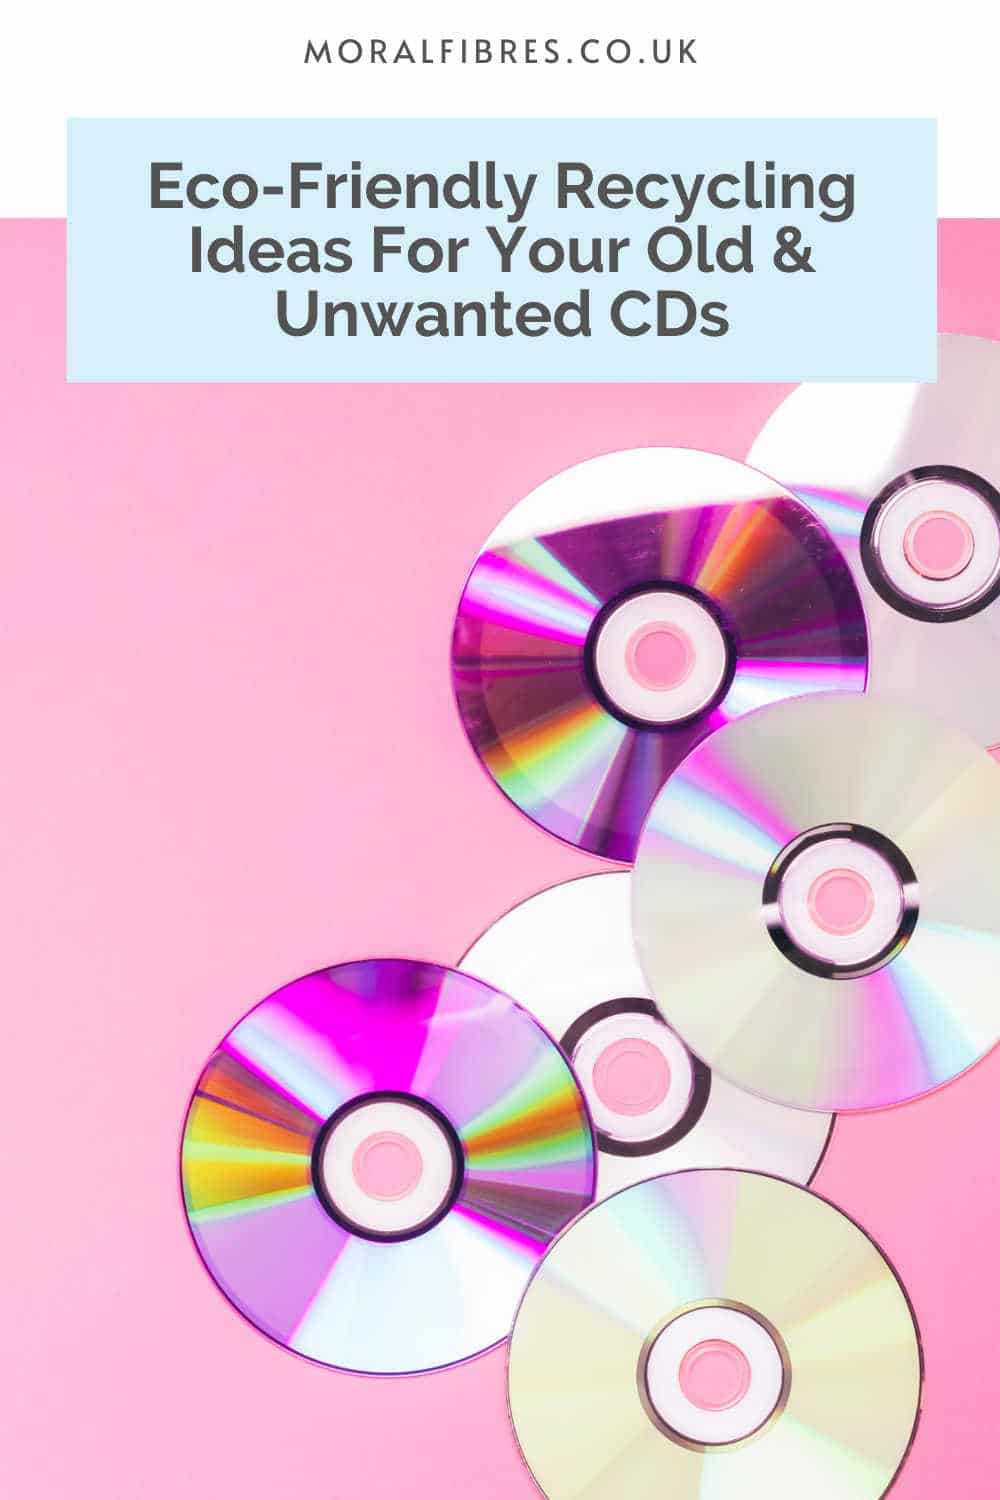 CDs on a pink background, with a blue text box that says what to do with old CDs and eco-friendly ways to recycle them.